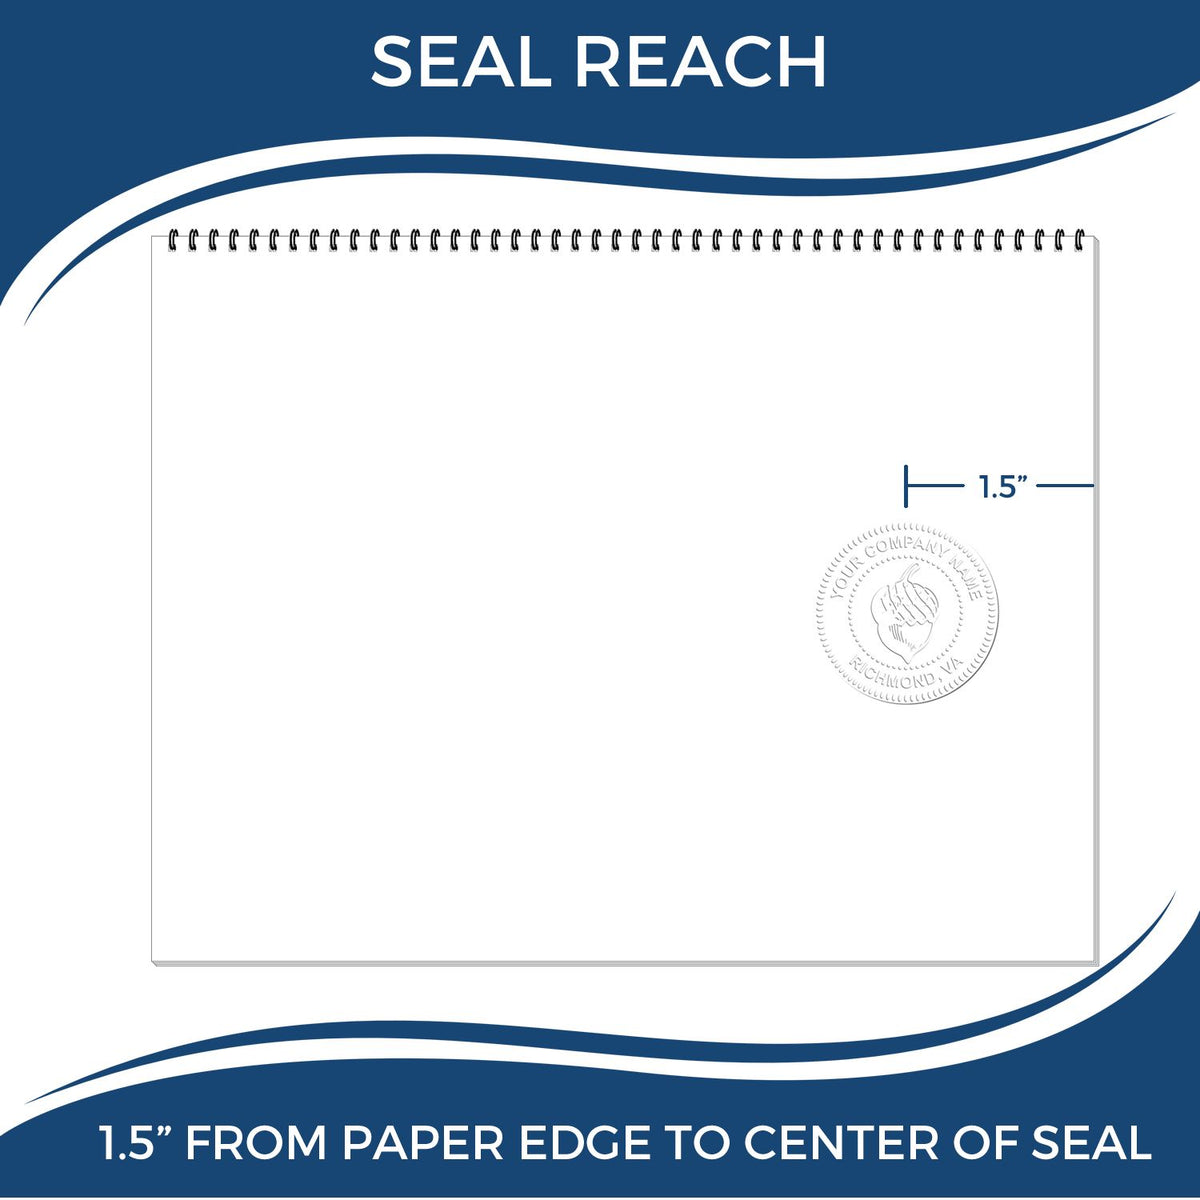 An infographic showing the seal reach which is represented by a ruler and a miniature seal image of the Handheld Montana Land Surveyor Seal